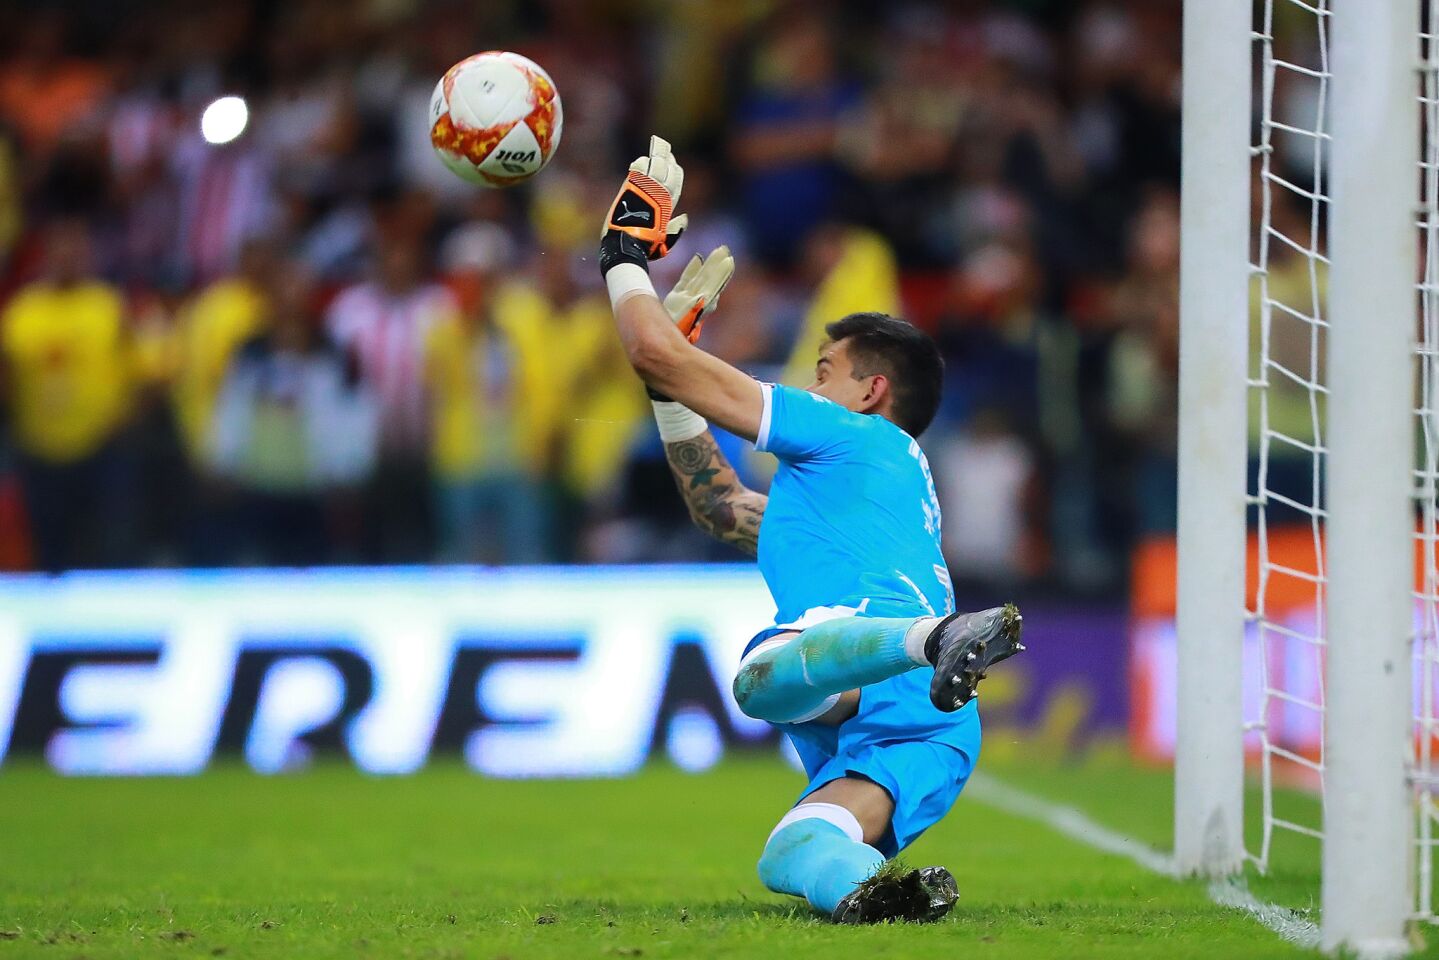 Raul Gudiño #1 of Chivas stops a penalty kick during the 11th round match between America and Chivas as part of the Torneo Apertura 2018 Liga MX at Azteca Stadium on September 30, 2018 in Mexico City, Mexico.